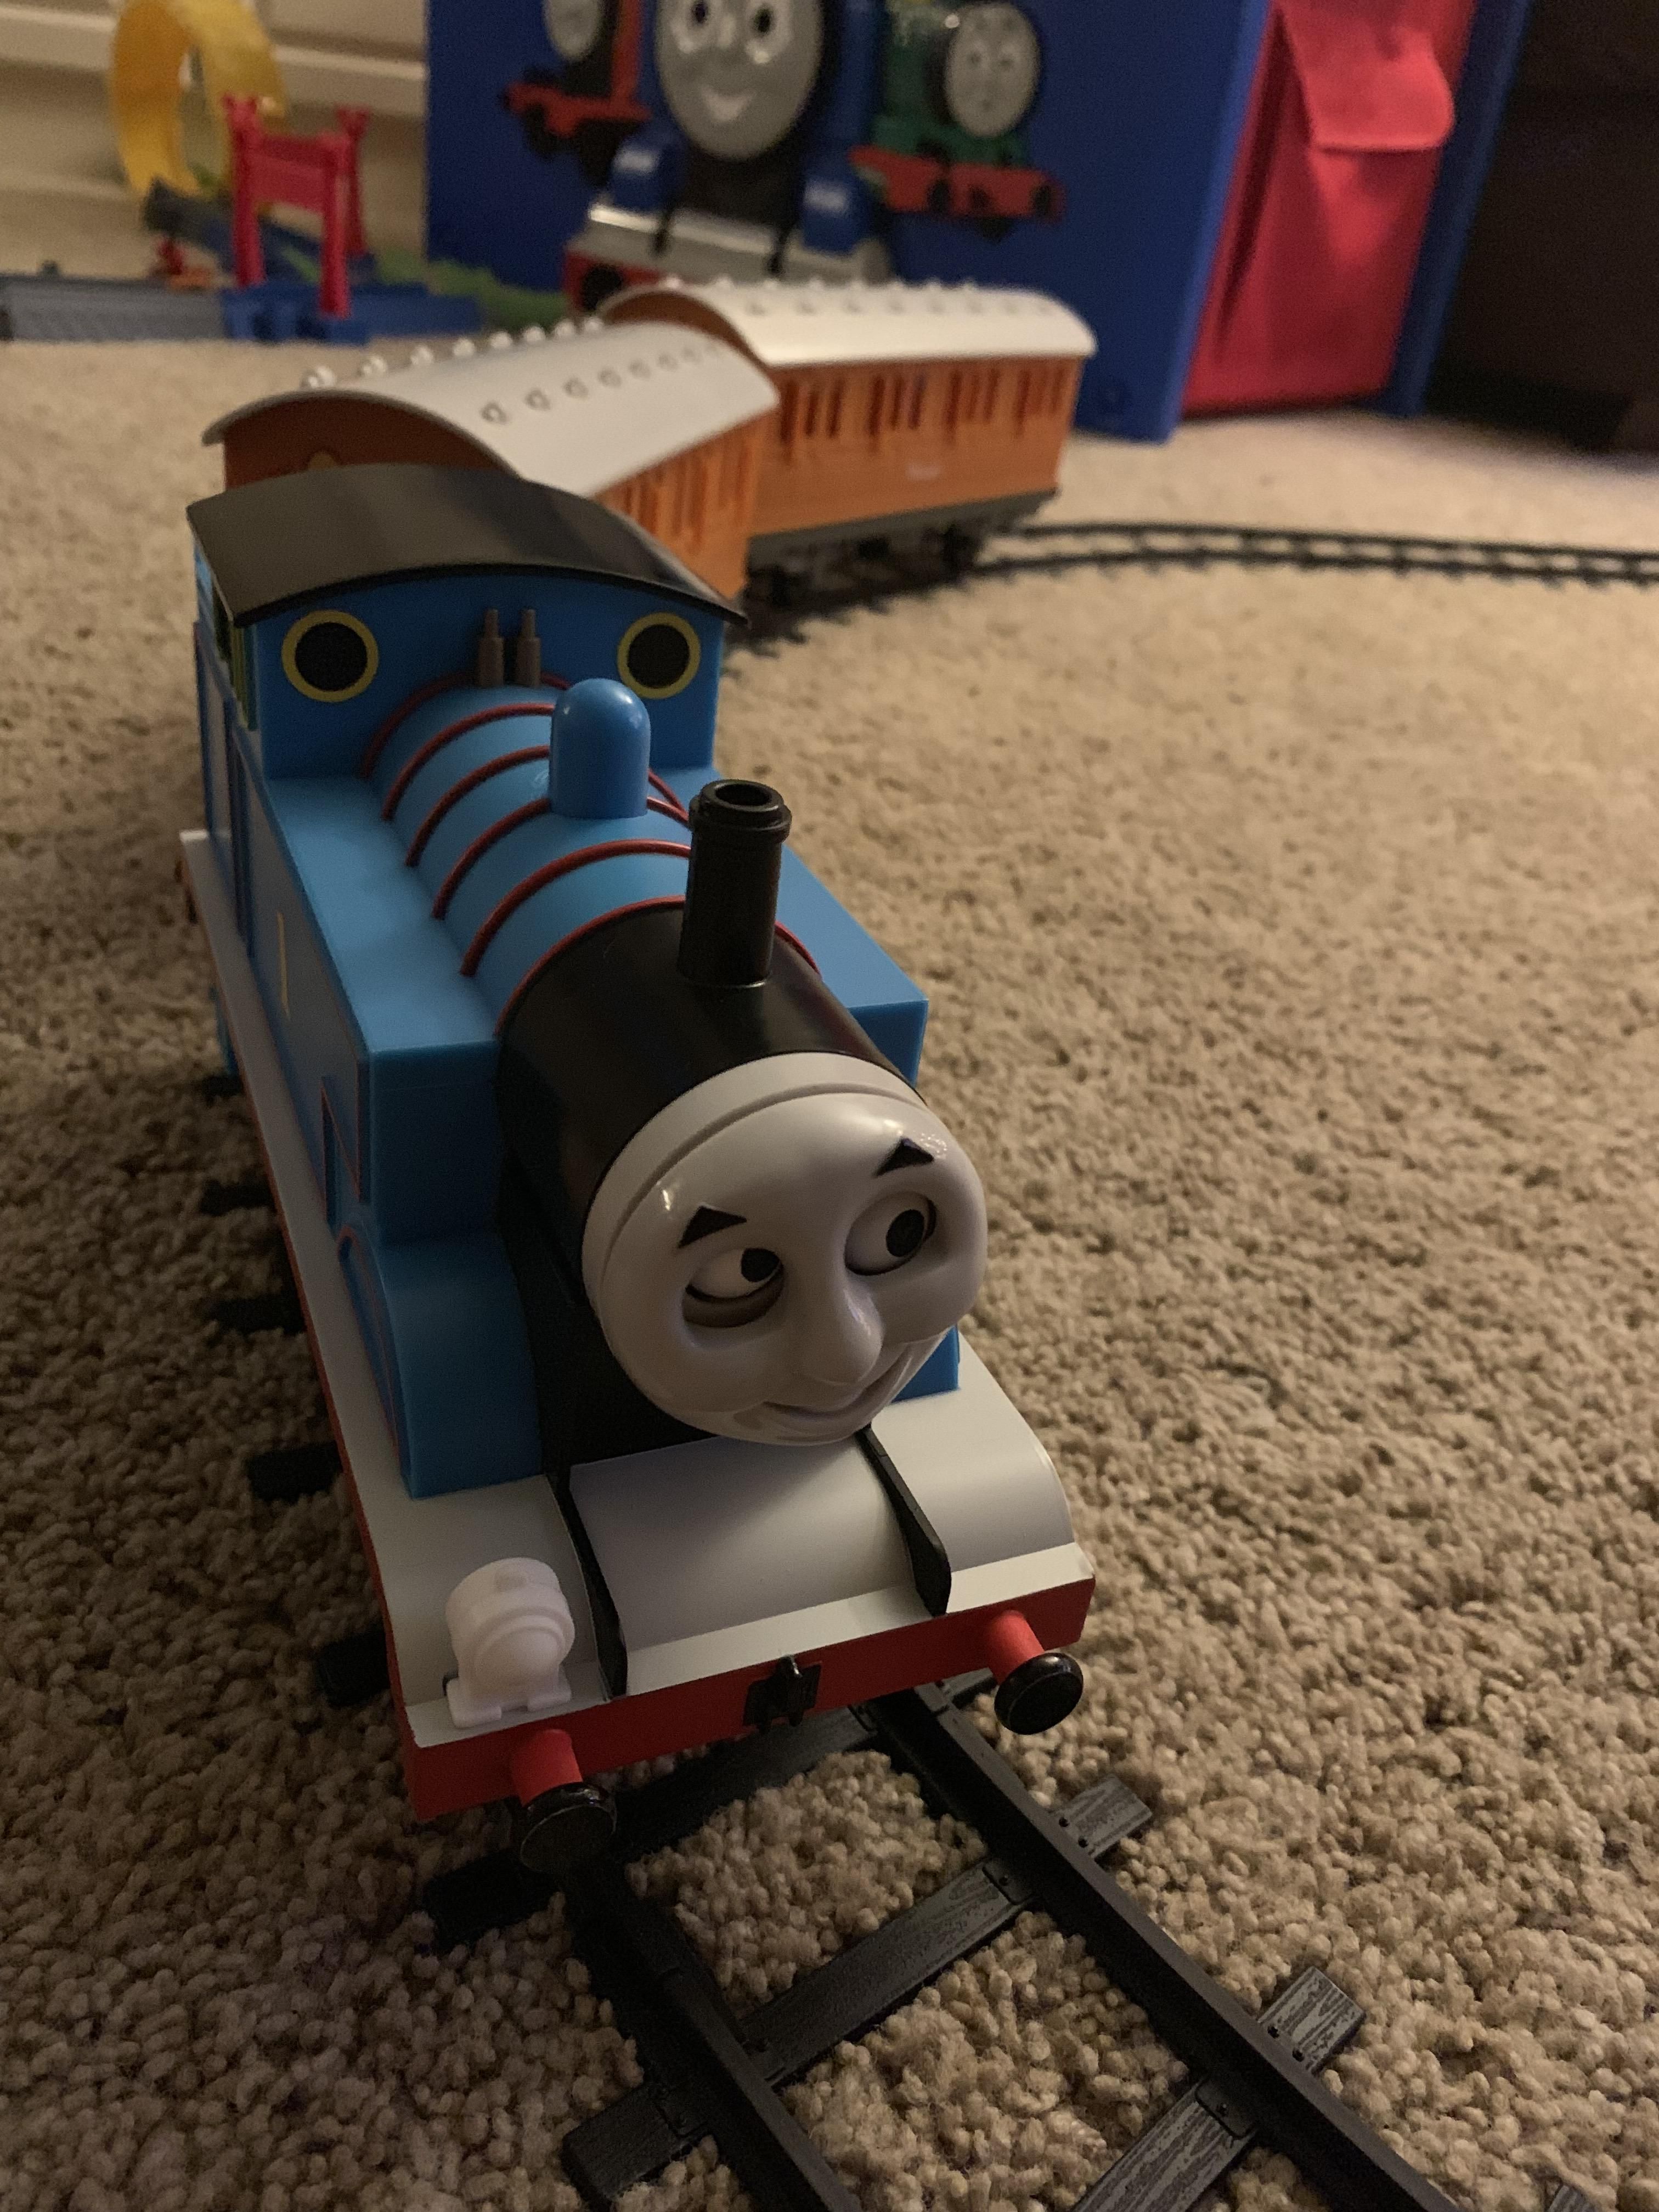 My son’s Thomas the Tank Engine toy looks like it killed another tank engine and is wearing its face...